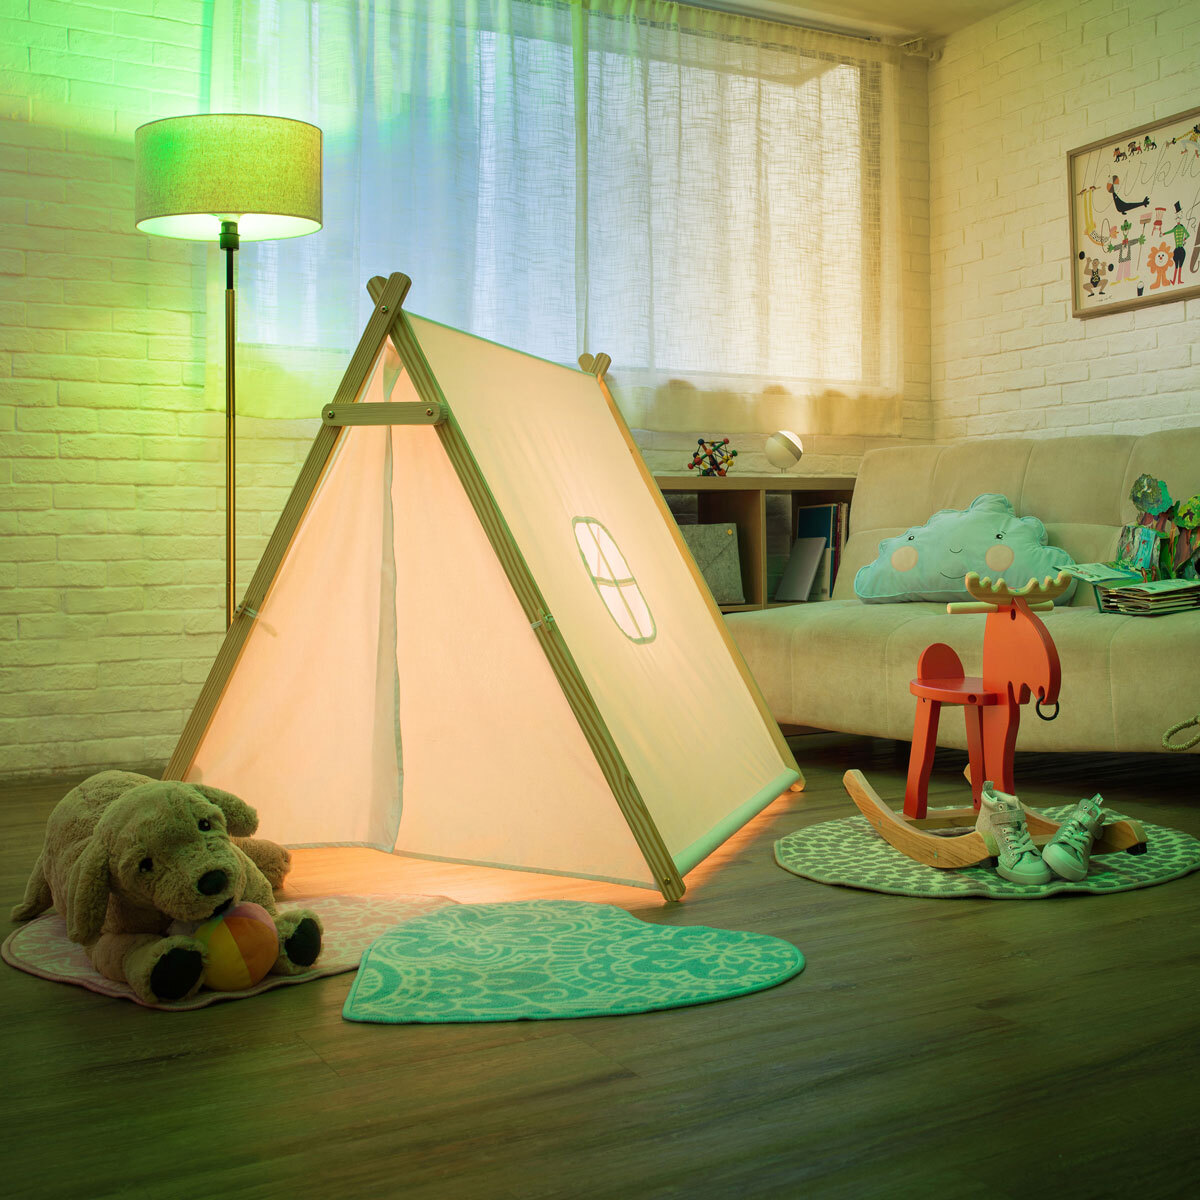 Lifestyle image of living room with tent and light bulbs in use